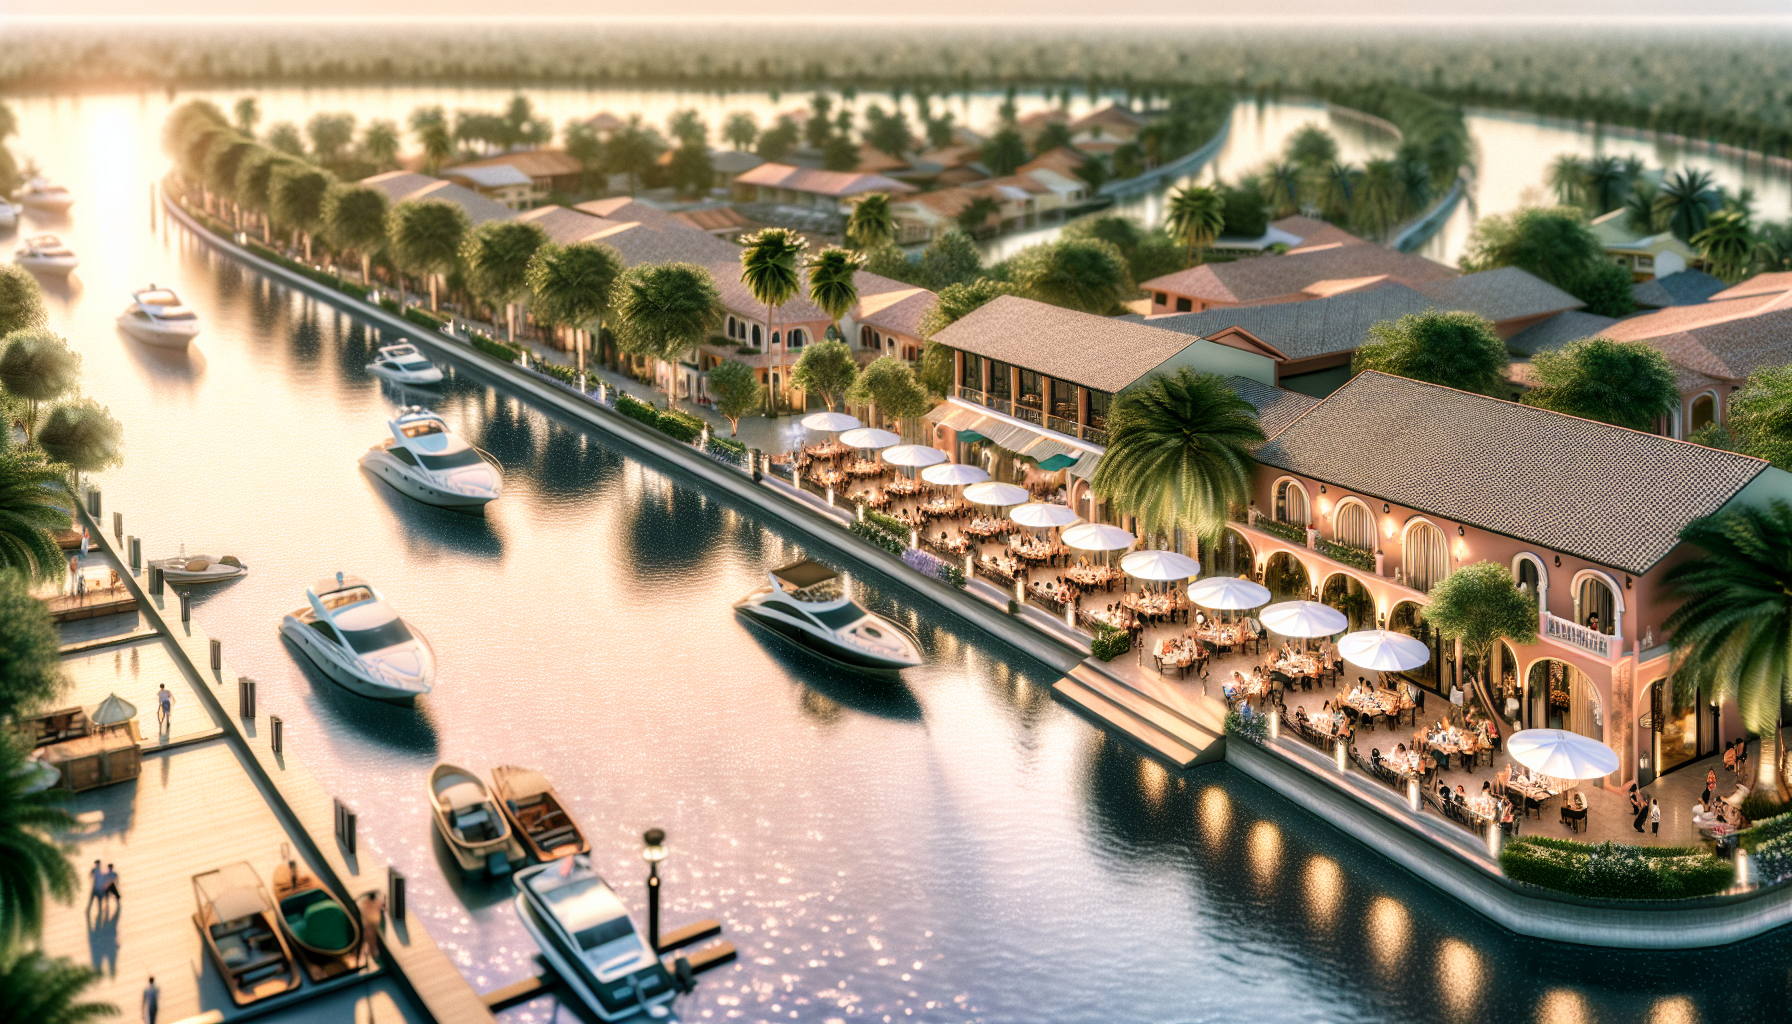 Aerial view of Shooters Waterfront and the Intracoastal Waterway